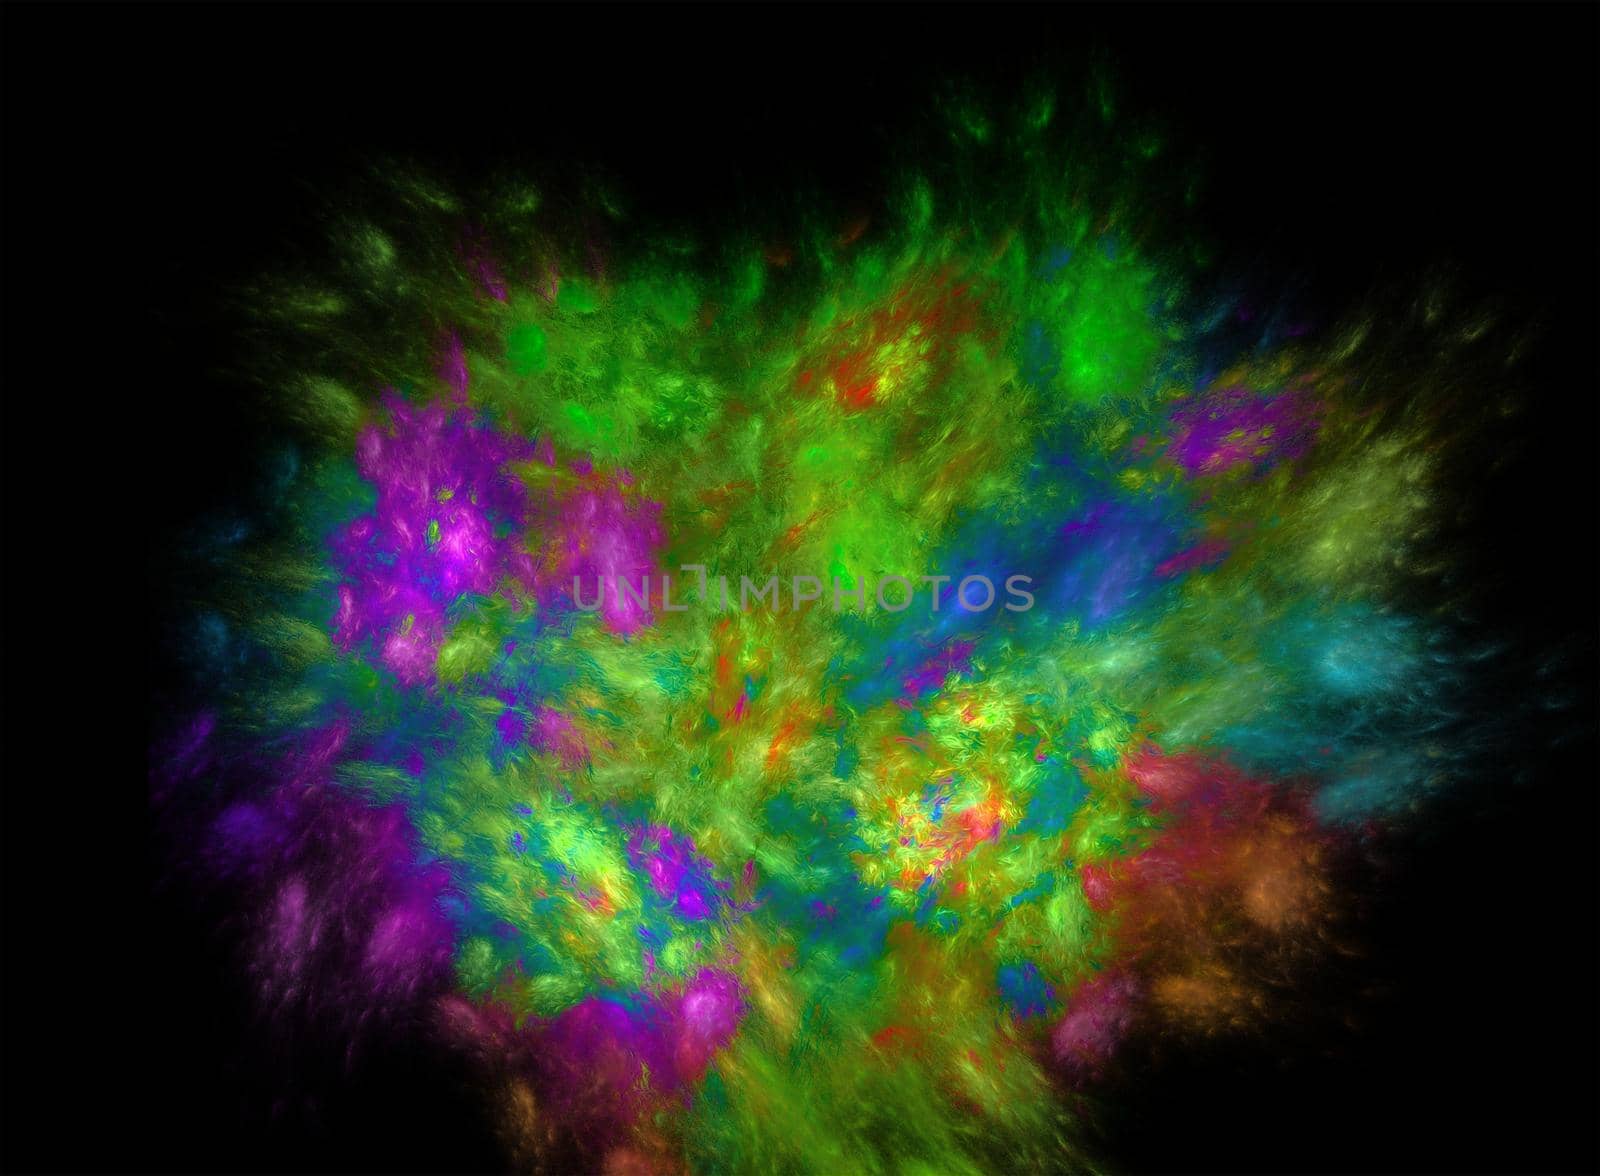 Bouquet of flowers in an abstract style on a black background